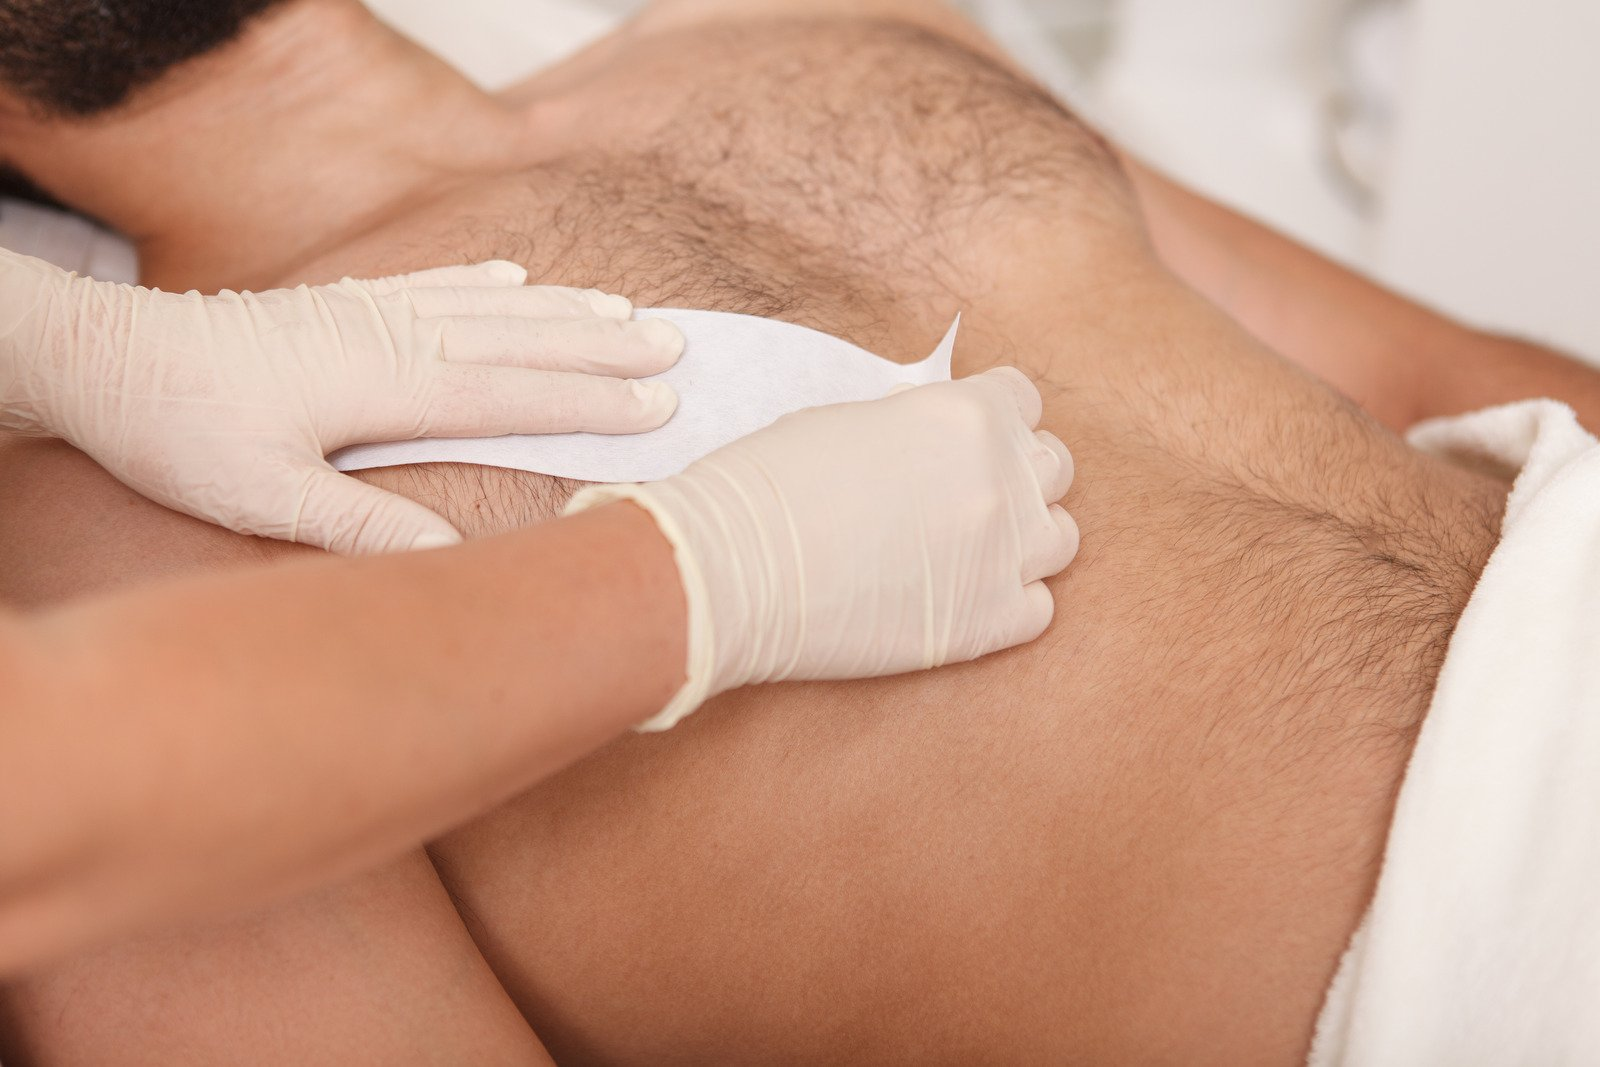 waxing as hair removal, slow hair regrowth, removing hair safely